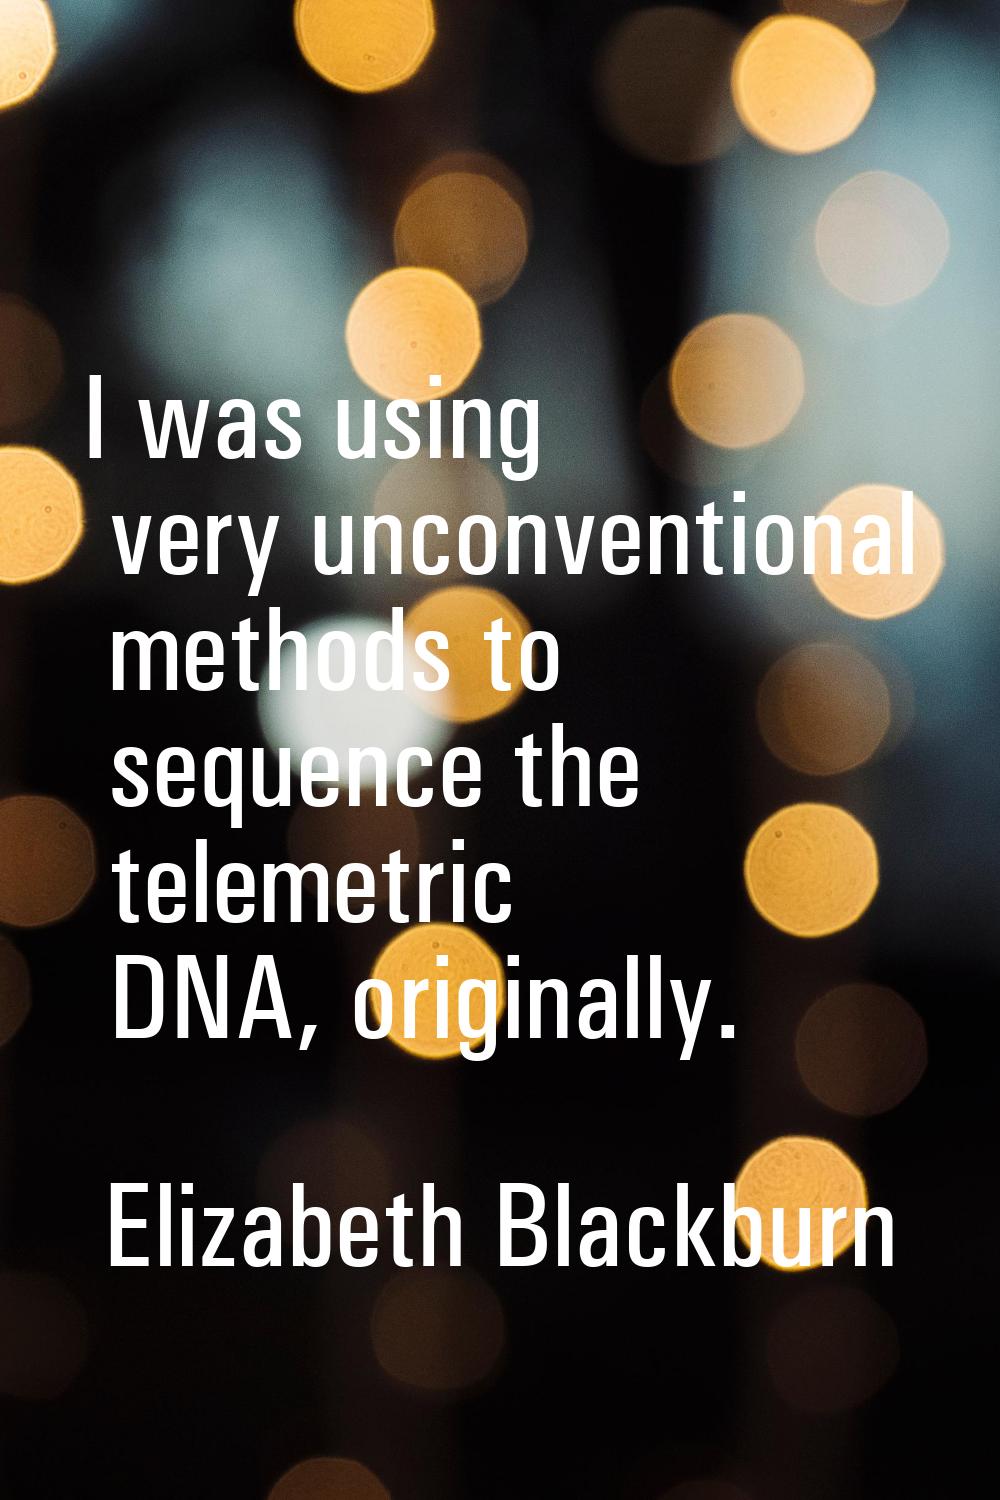 I was using very unconventional methods to sequence the telemetric DNA, originally.